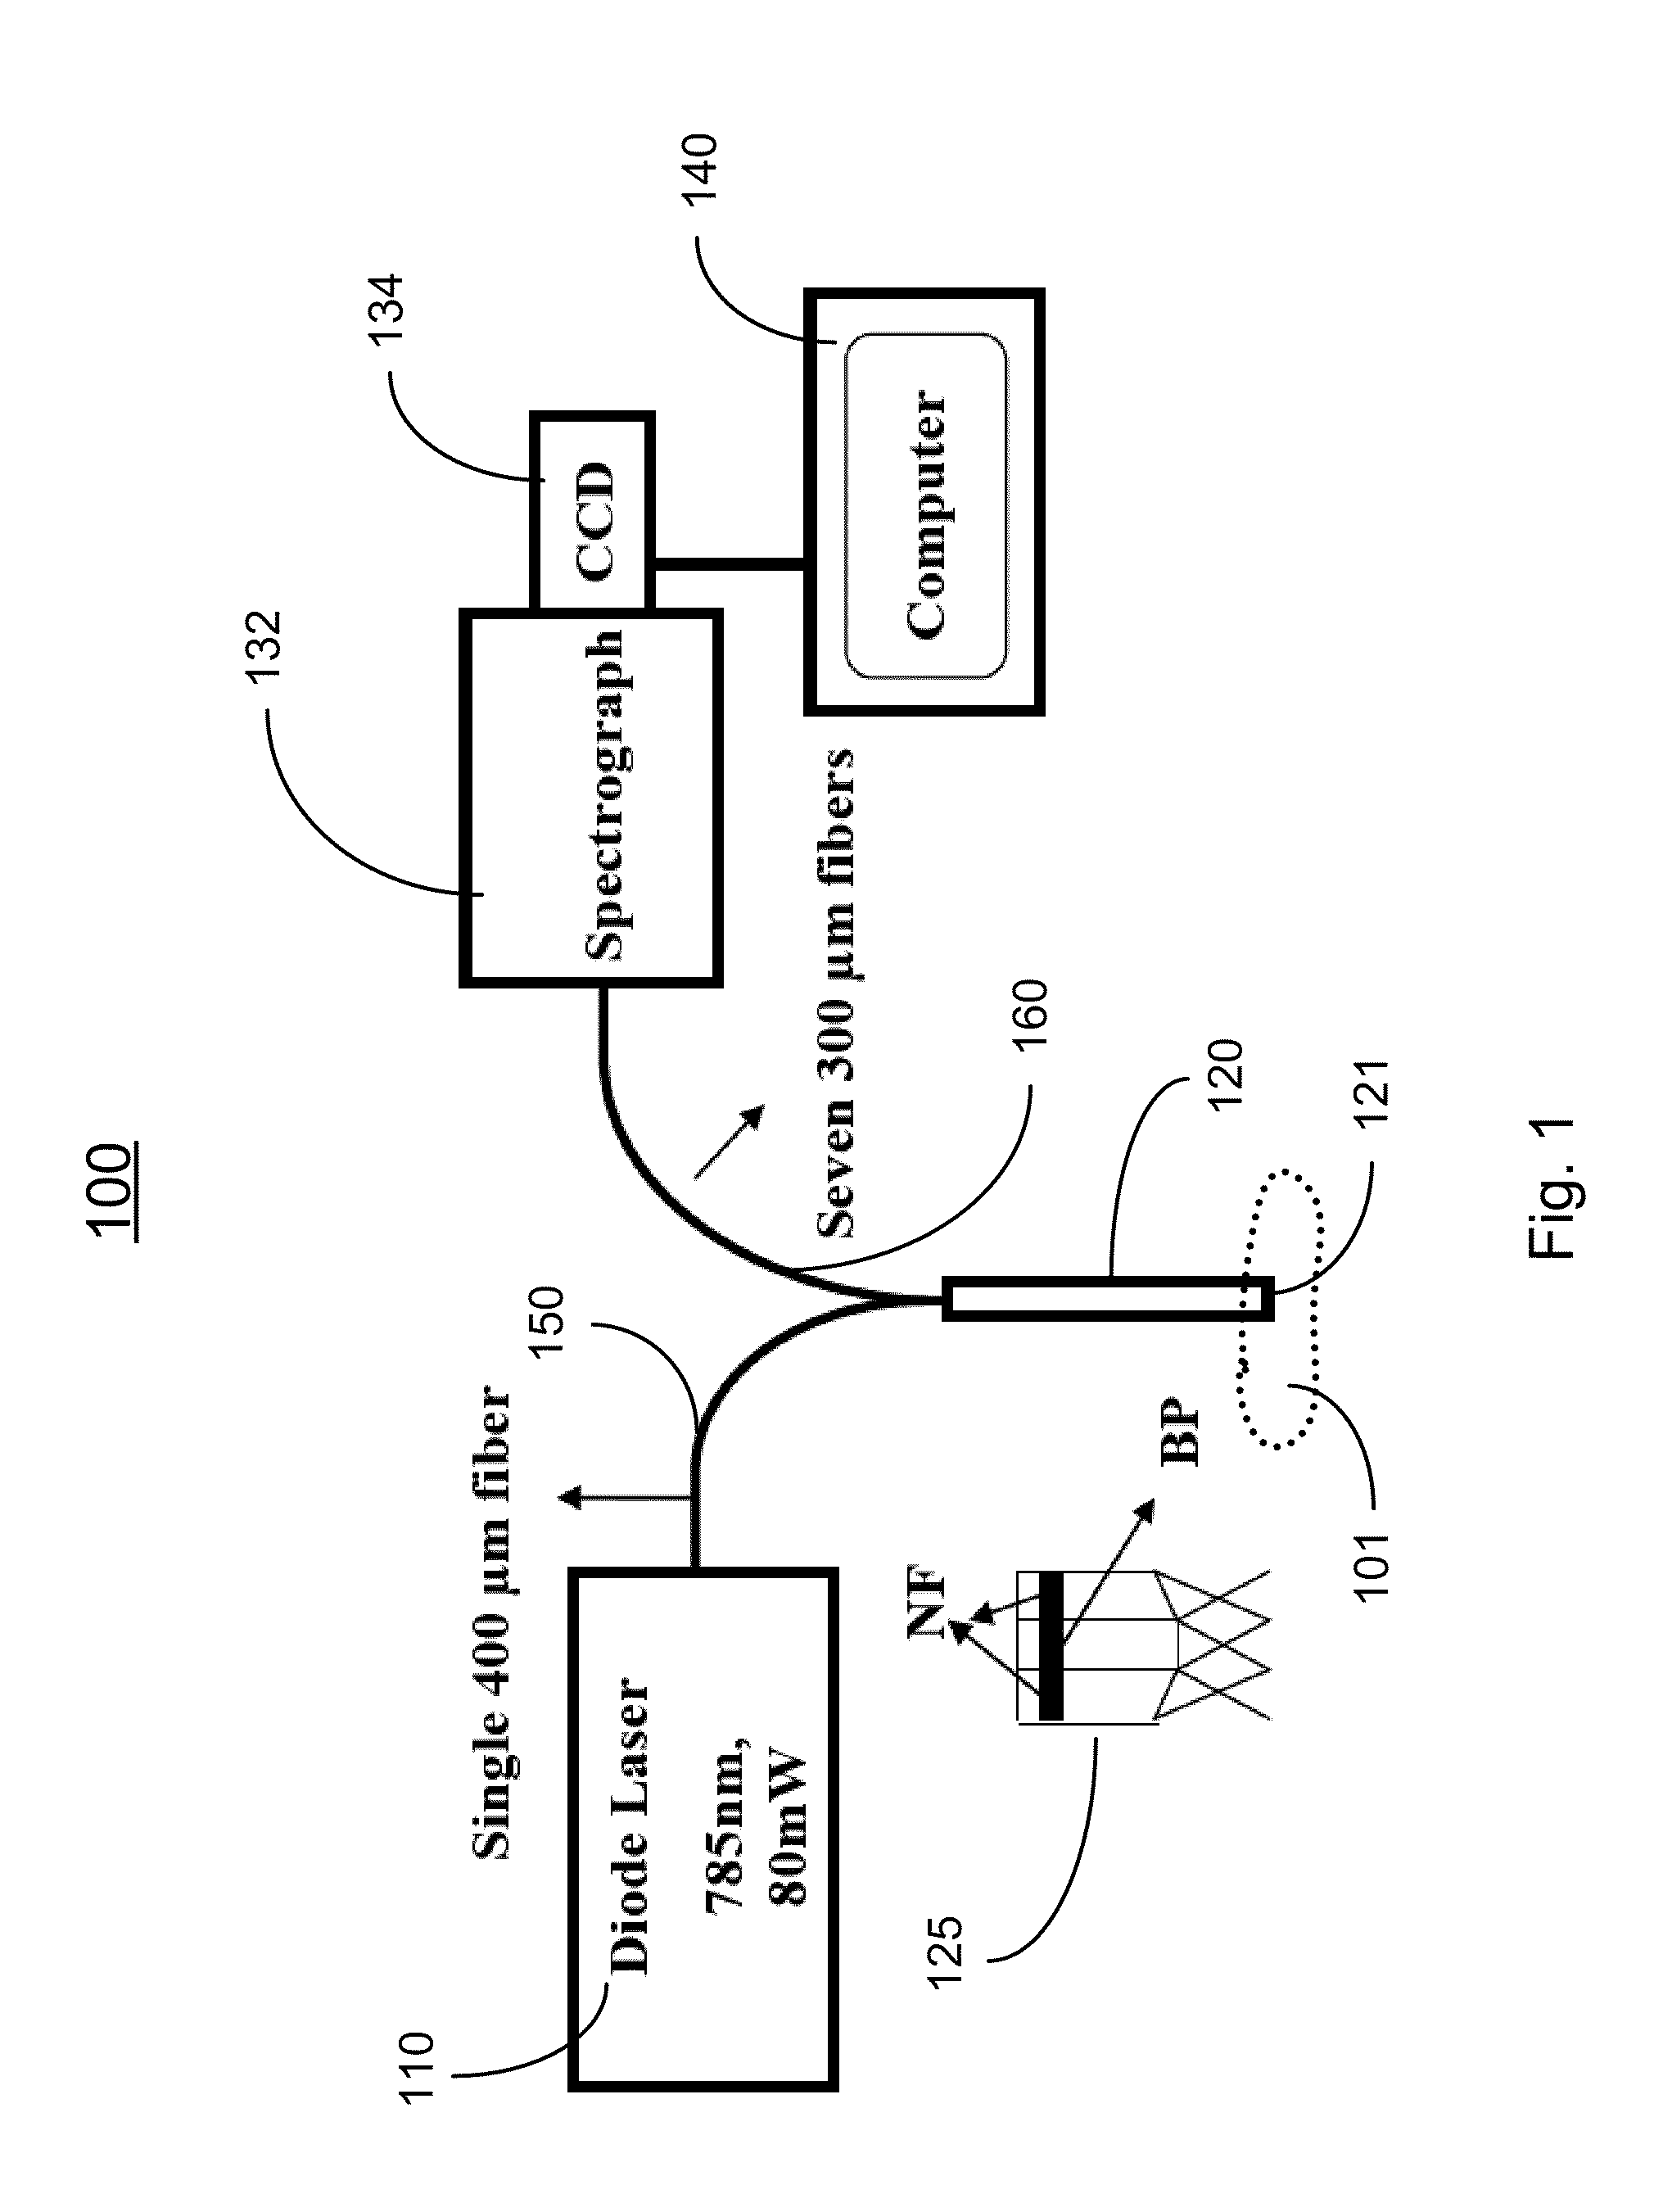 Spatially offset raman spectroscopy of layered soft tissues and applications of same